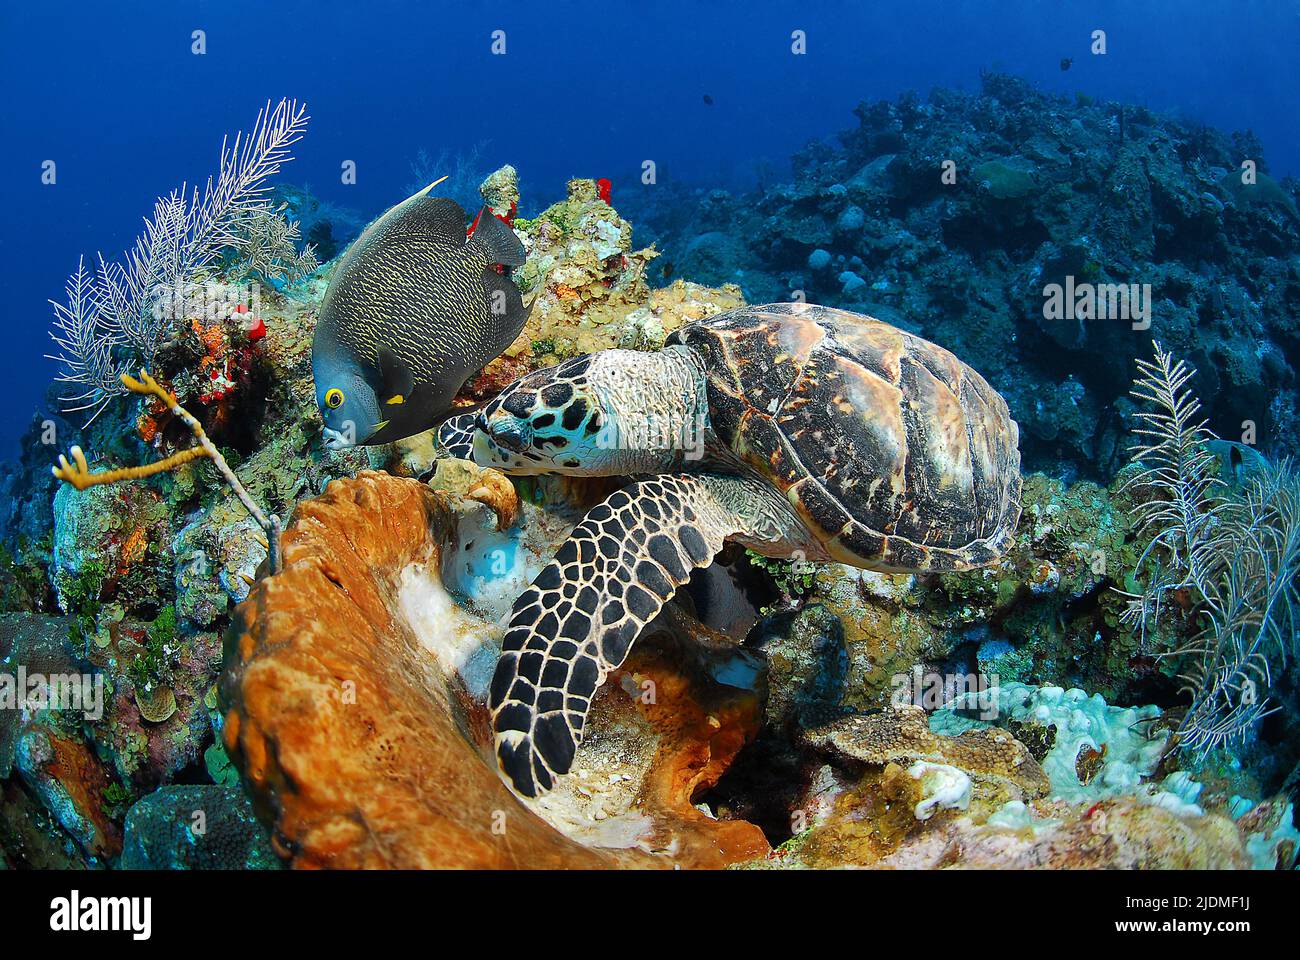 Hawksbill Turtle (Eretmochelys imbricata) and a French Angelfish (Pomacanthus paru) in a colourful caribbean coral reef, Cayman Islands, Caribbean Stock Photo